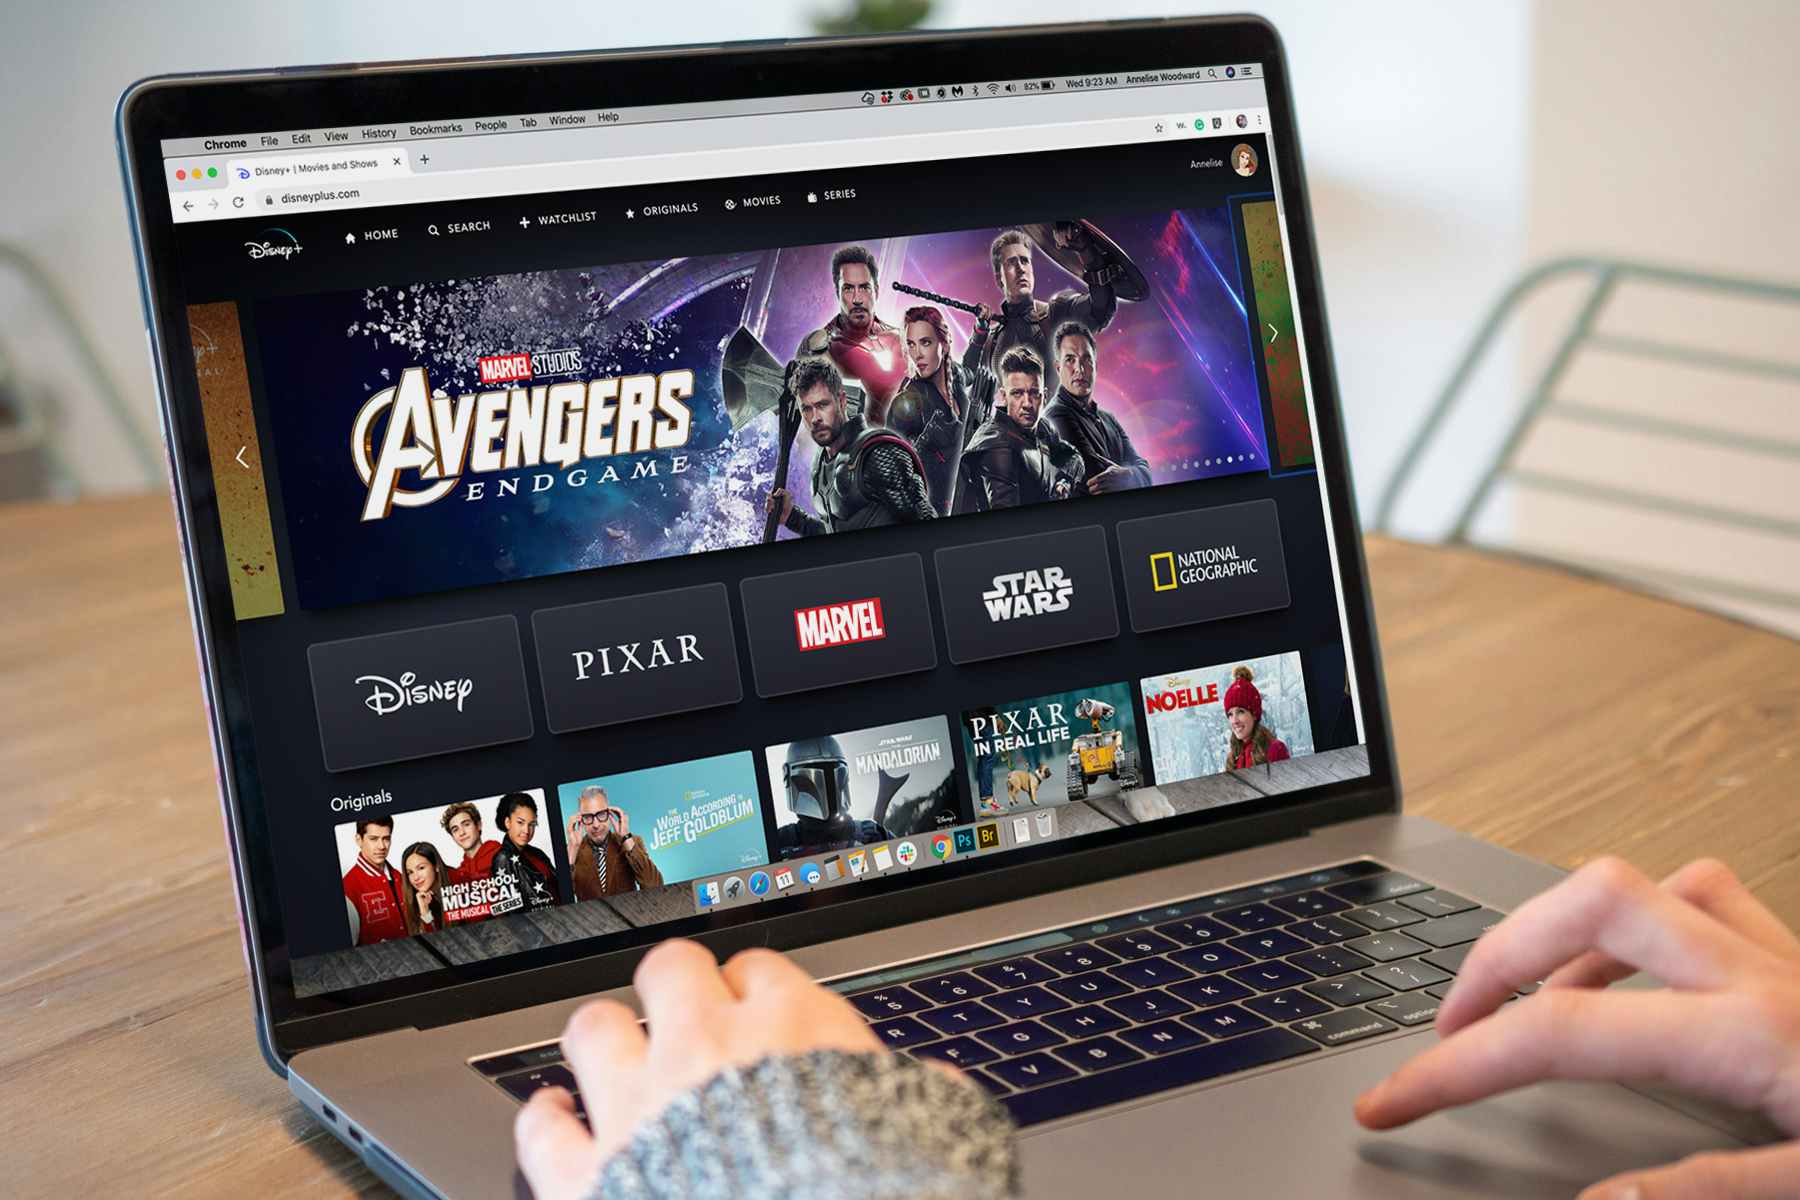 Disney+ streaming service on a computer screen